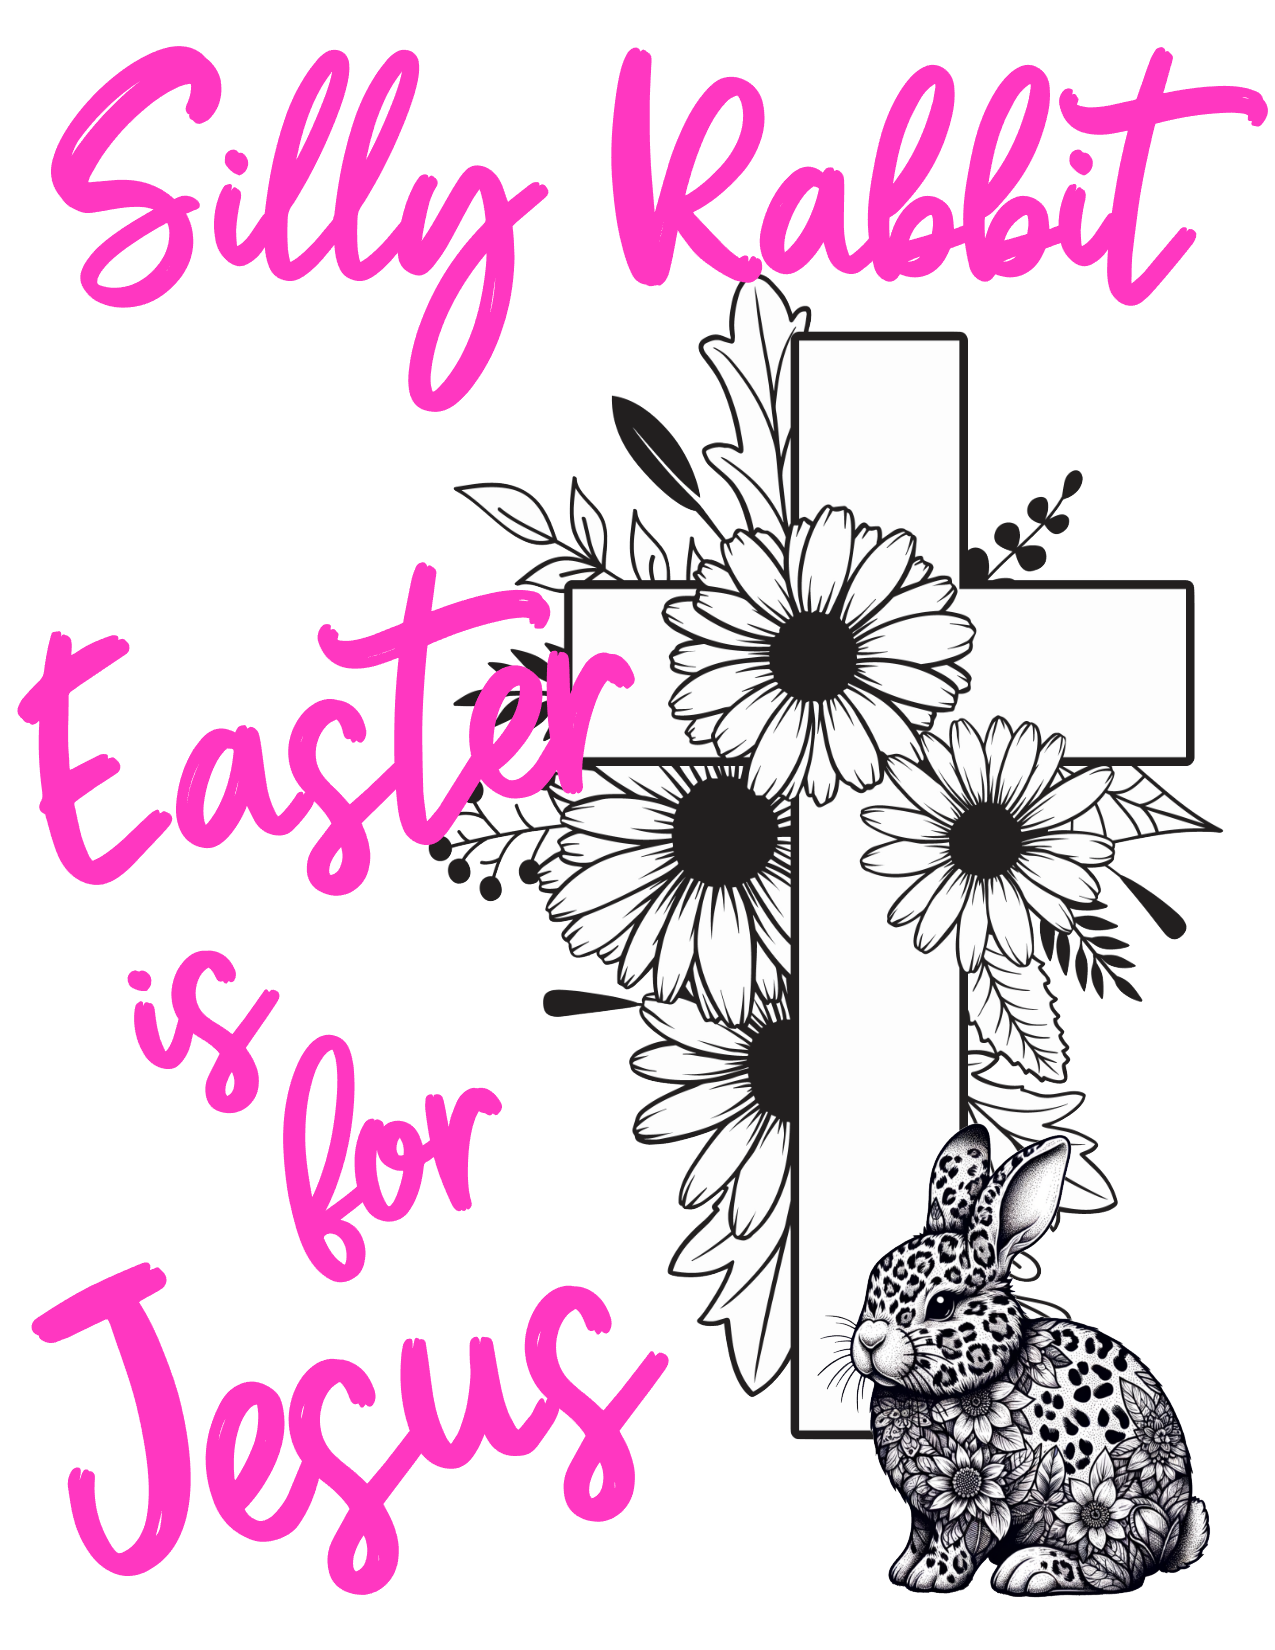 #337 Silly Rabbit Easter is for Jesus